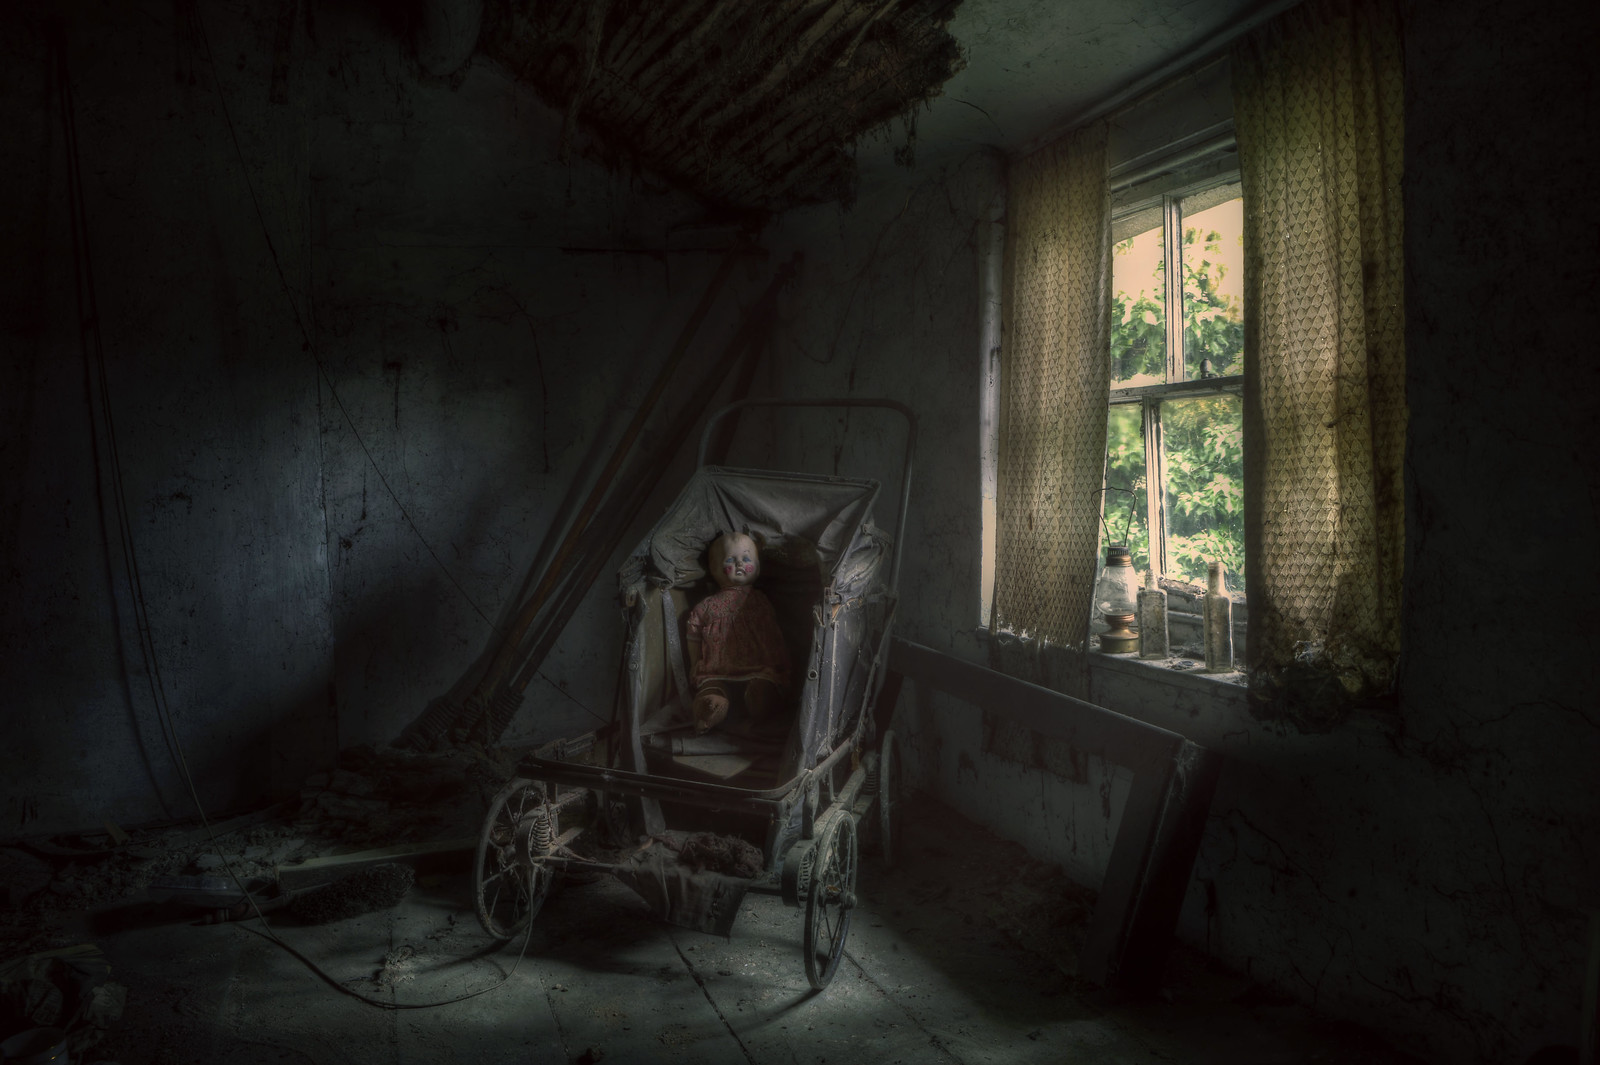 Photo by Andre Govia.